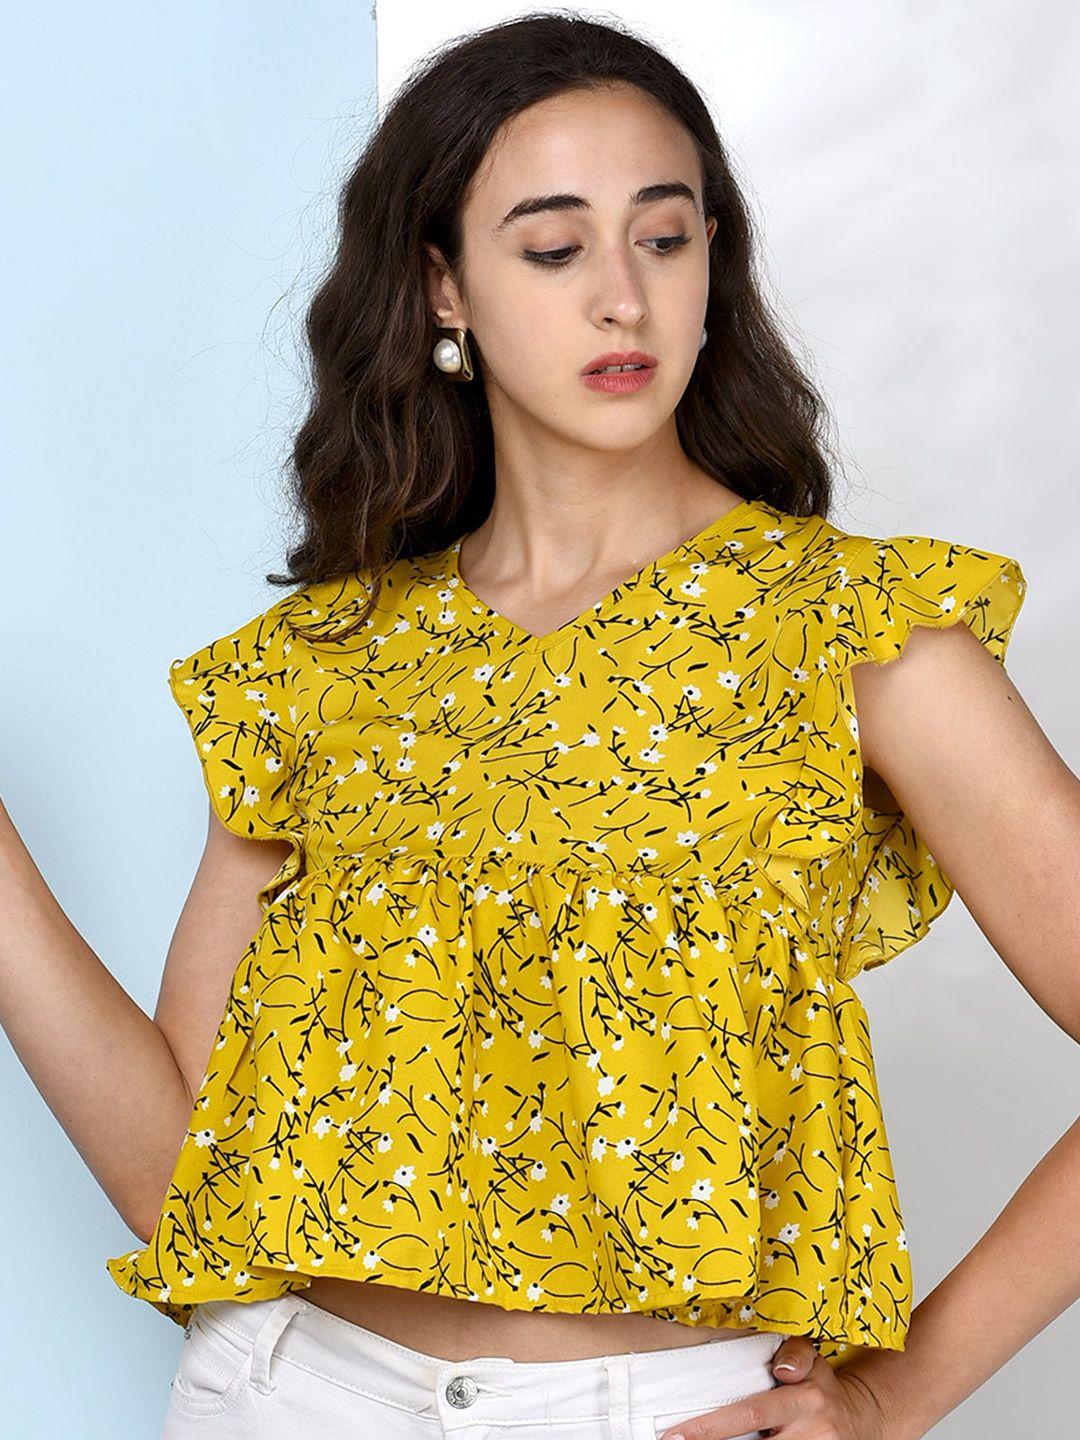 chimpaaanzee yellow & white floral print cinched waist crop top